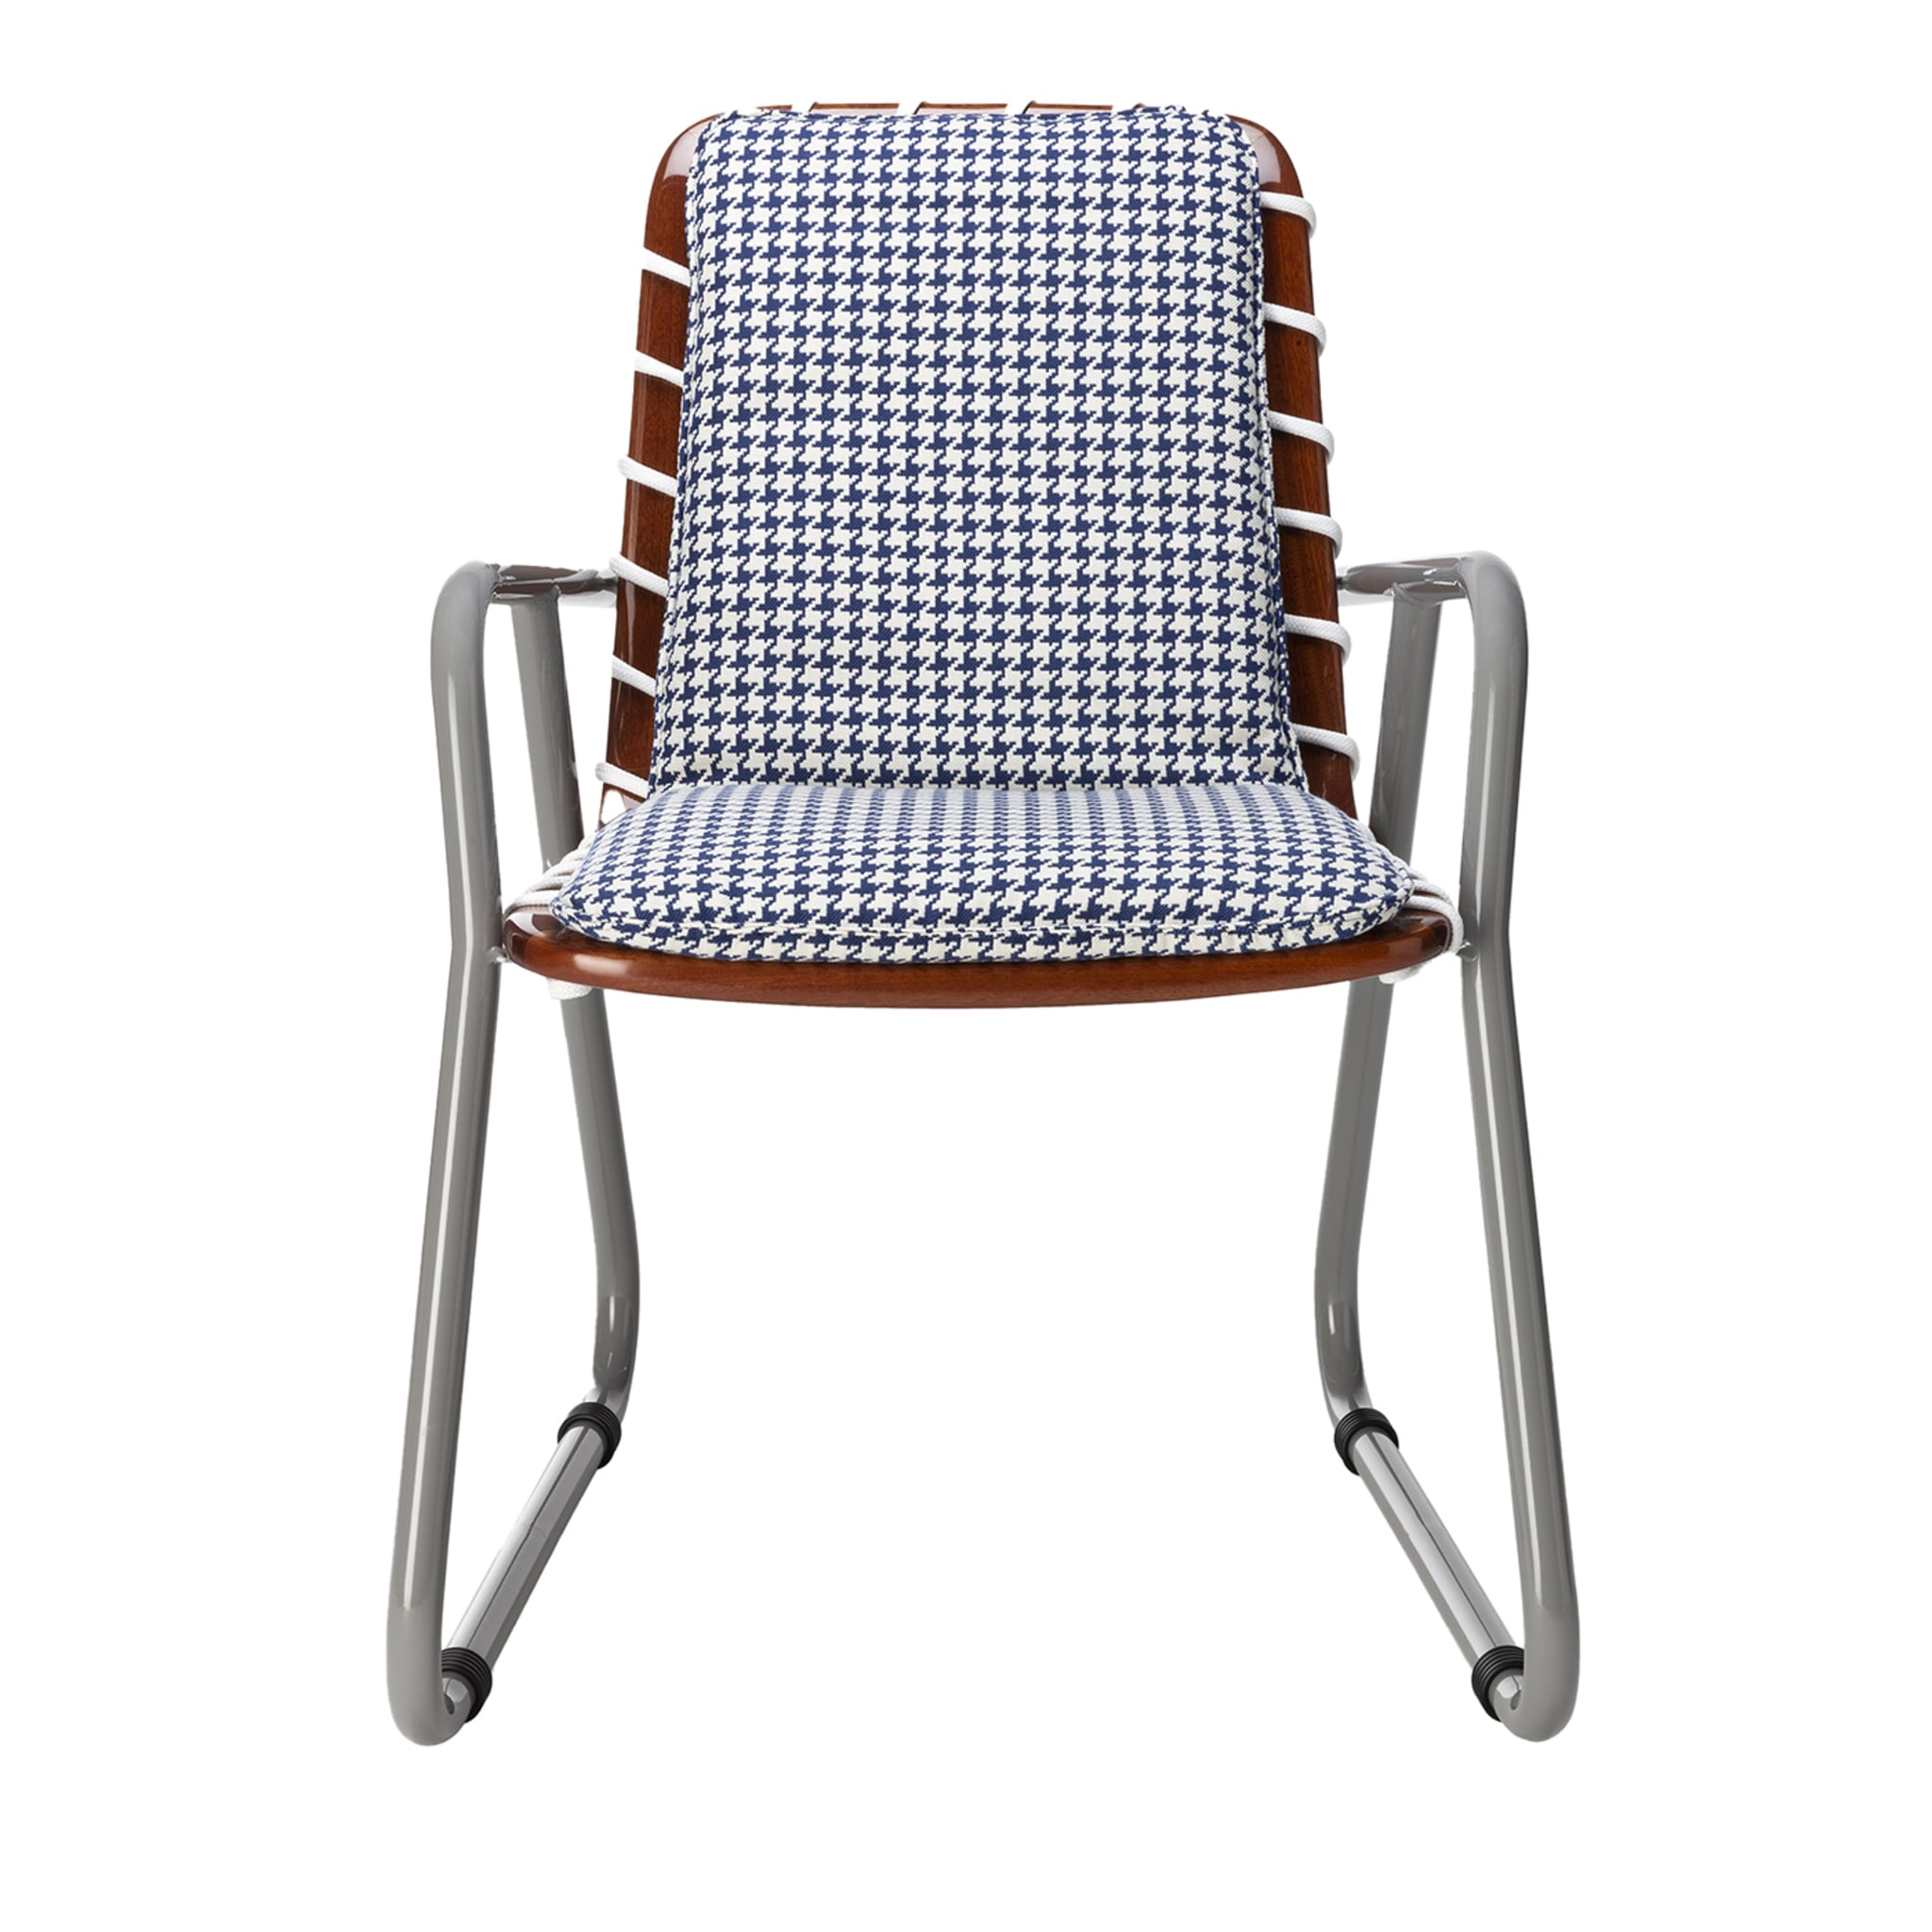 Sunset Dining Chair by Paola Navone - Main view